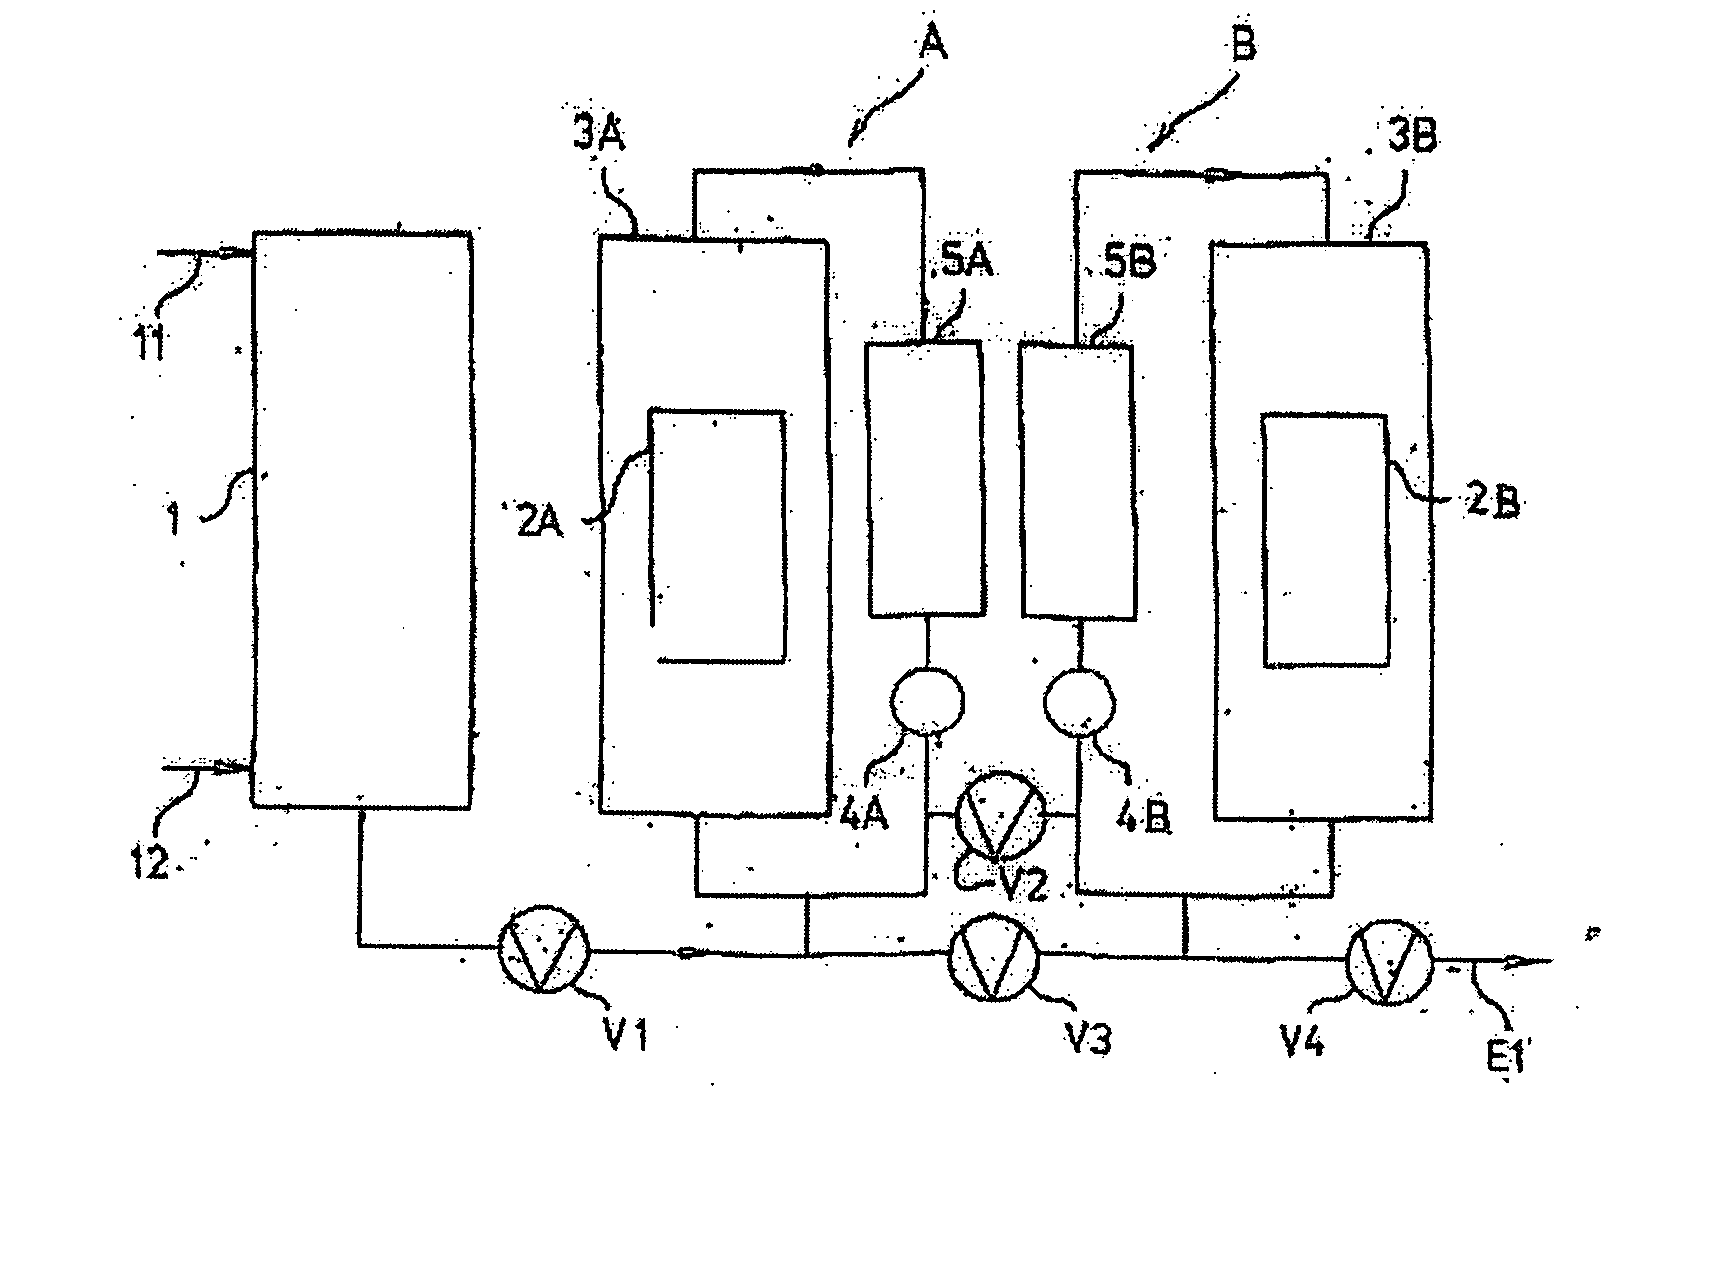 Method for production of plant extracts